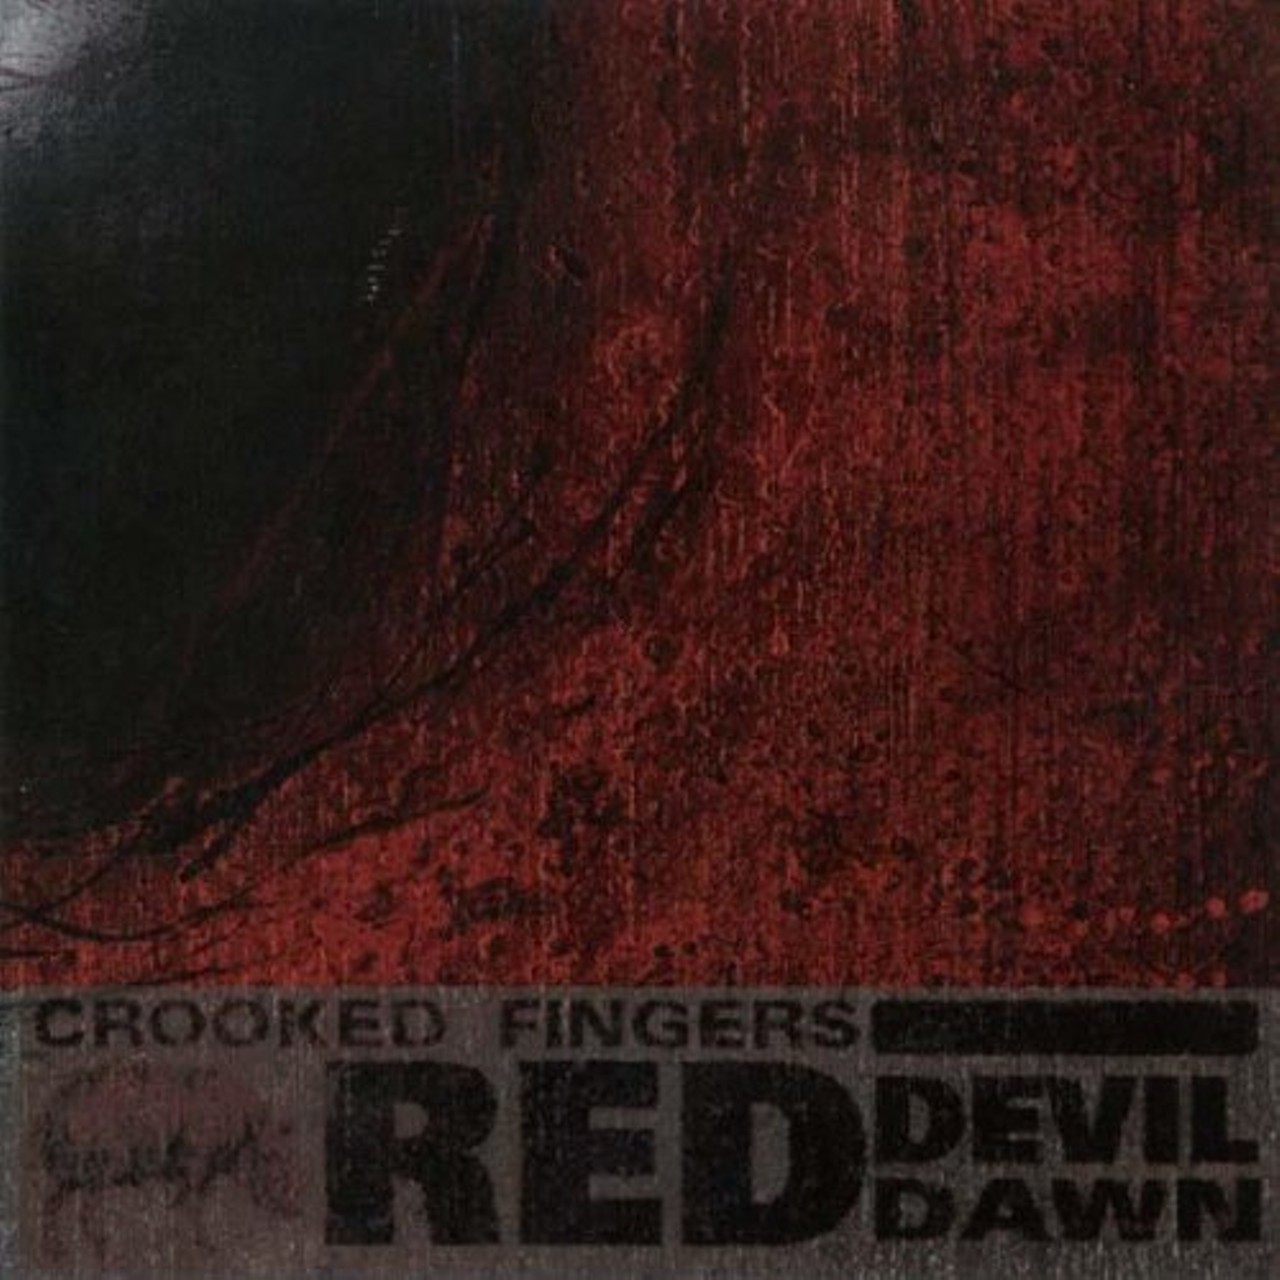 Crooked Fingers &#150; Red Devil Dawn
Call up this album for long, pensive drives.
